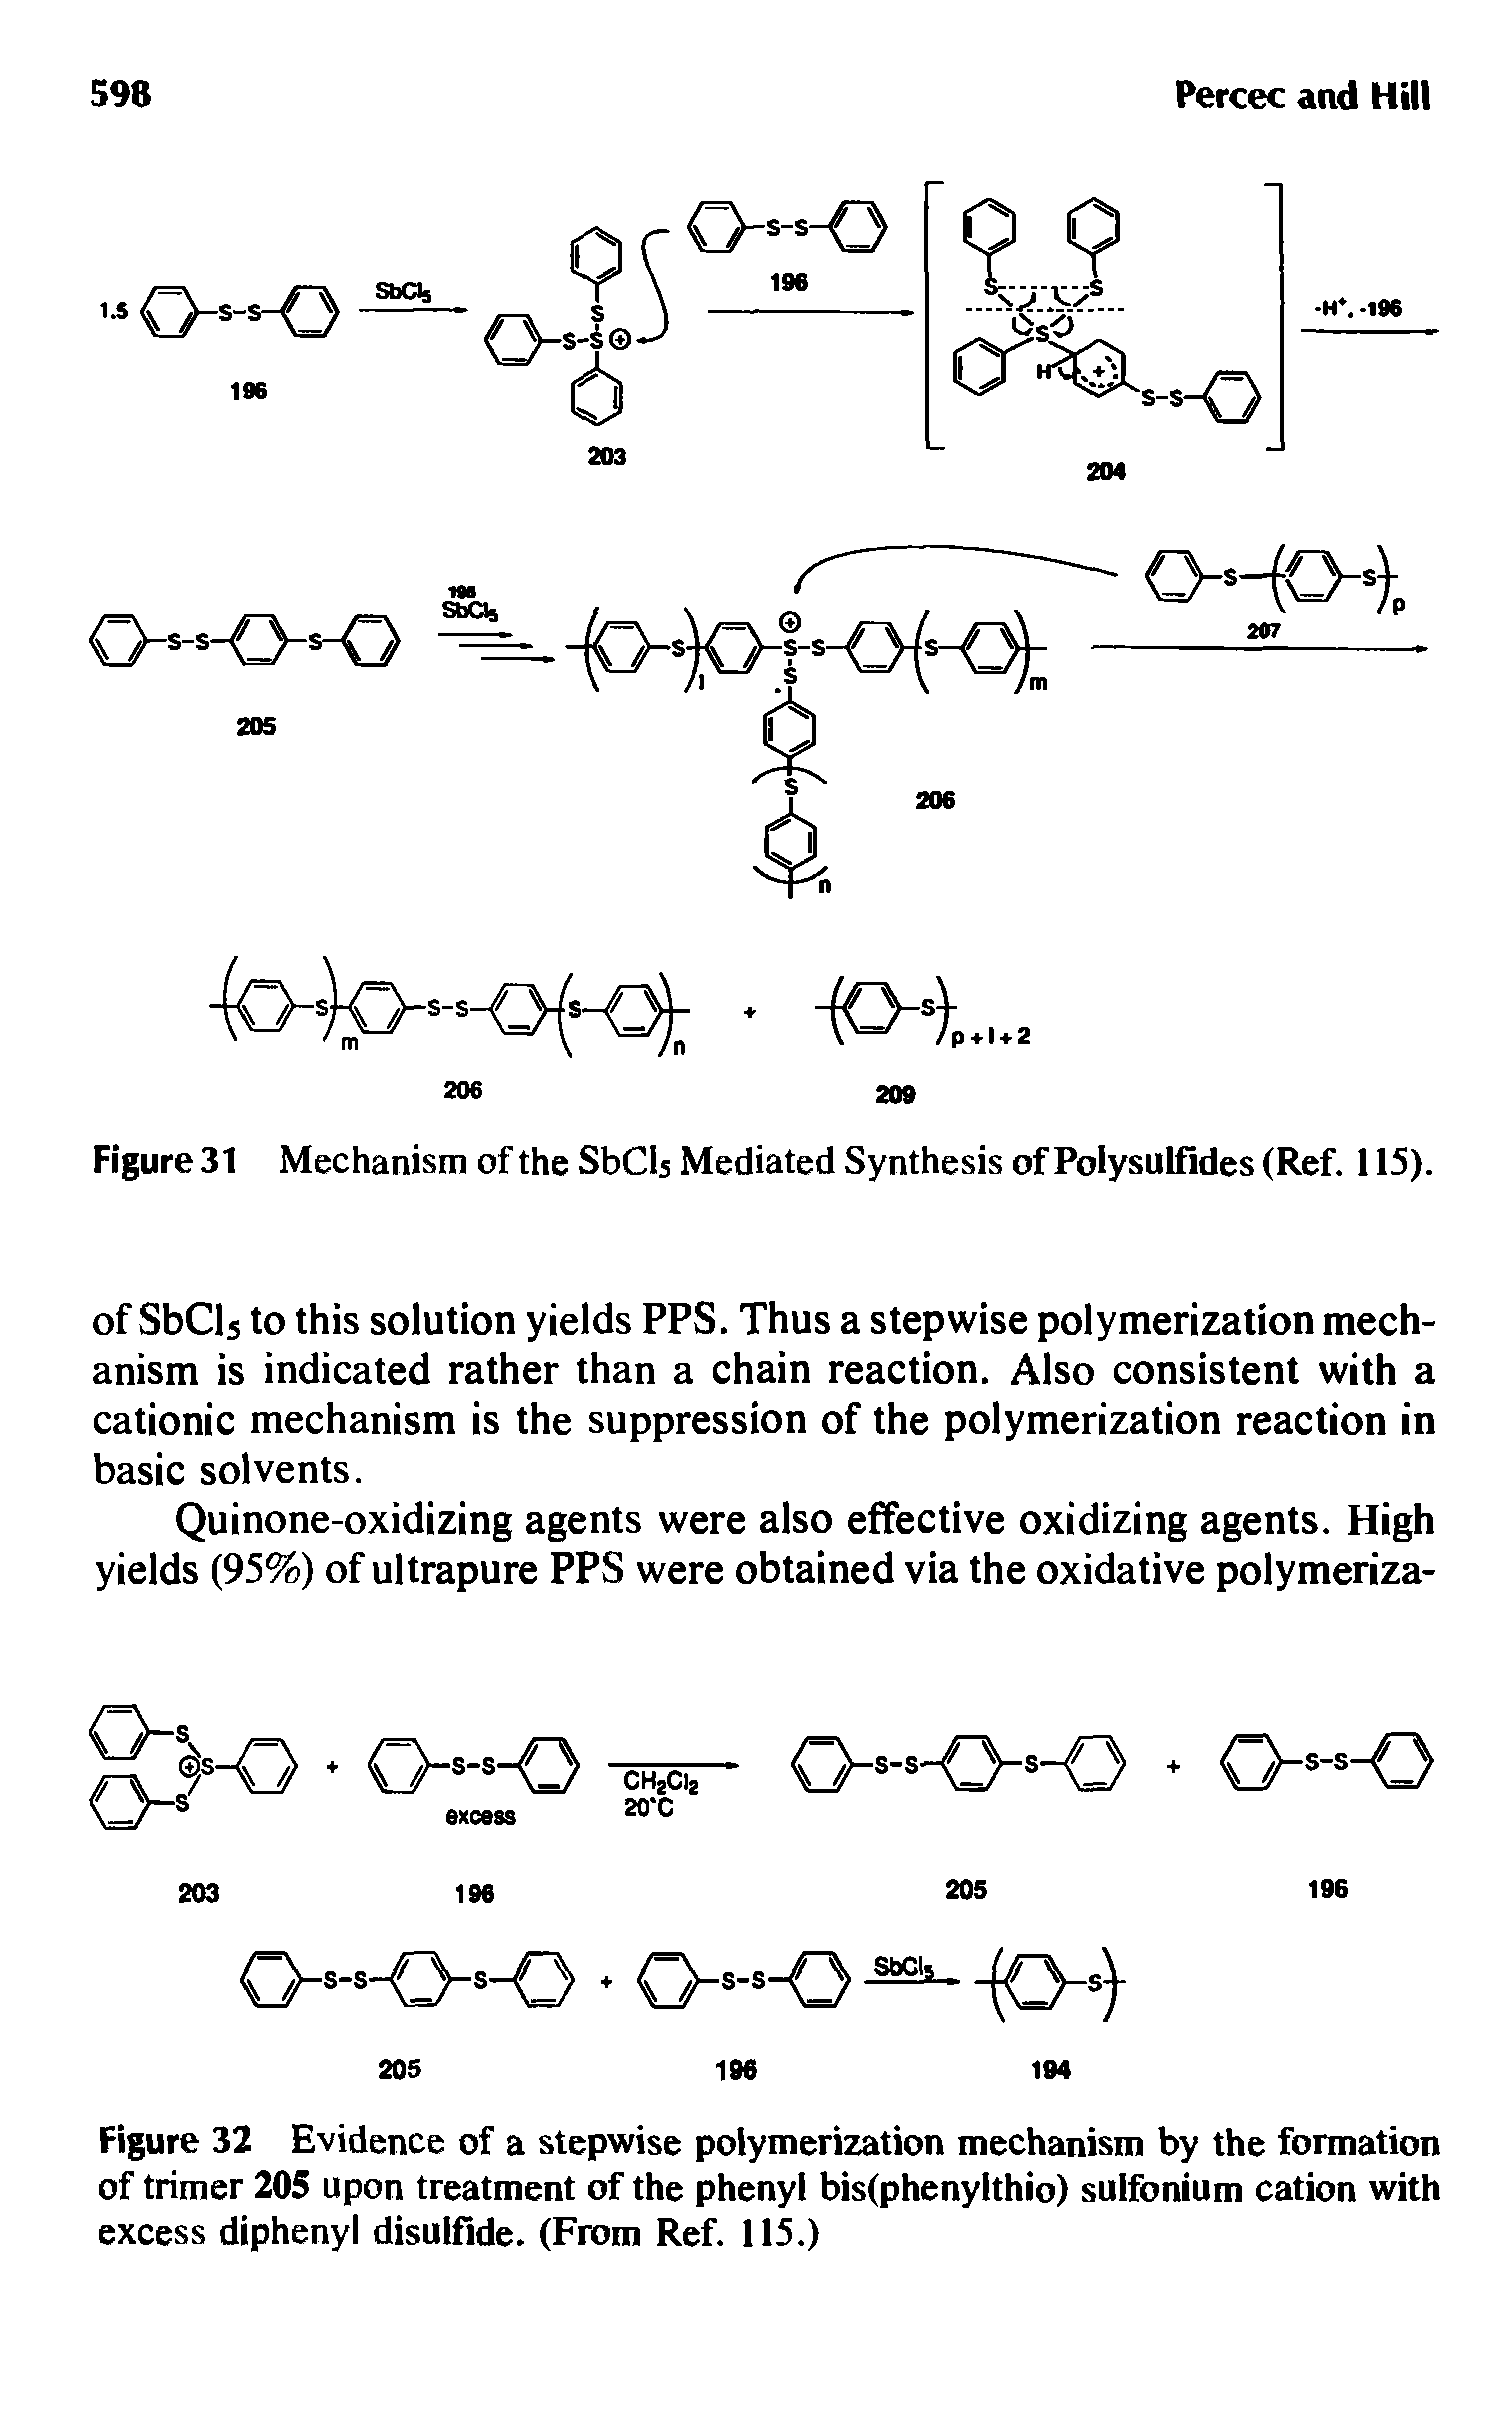 Figure 32 Evidence of a stepwise polymerization mechanism by the formation of trimer 205 upon treatment of the phenyl bis(phenylthio) sulfonium cation with excess diphenyl disulfide. (From Ref. 115.)...